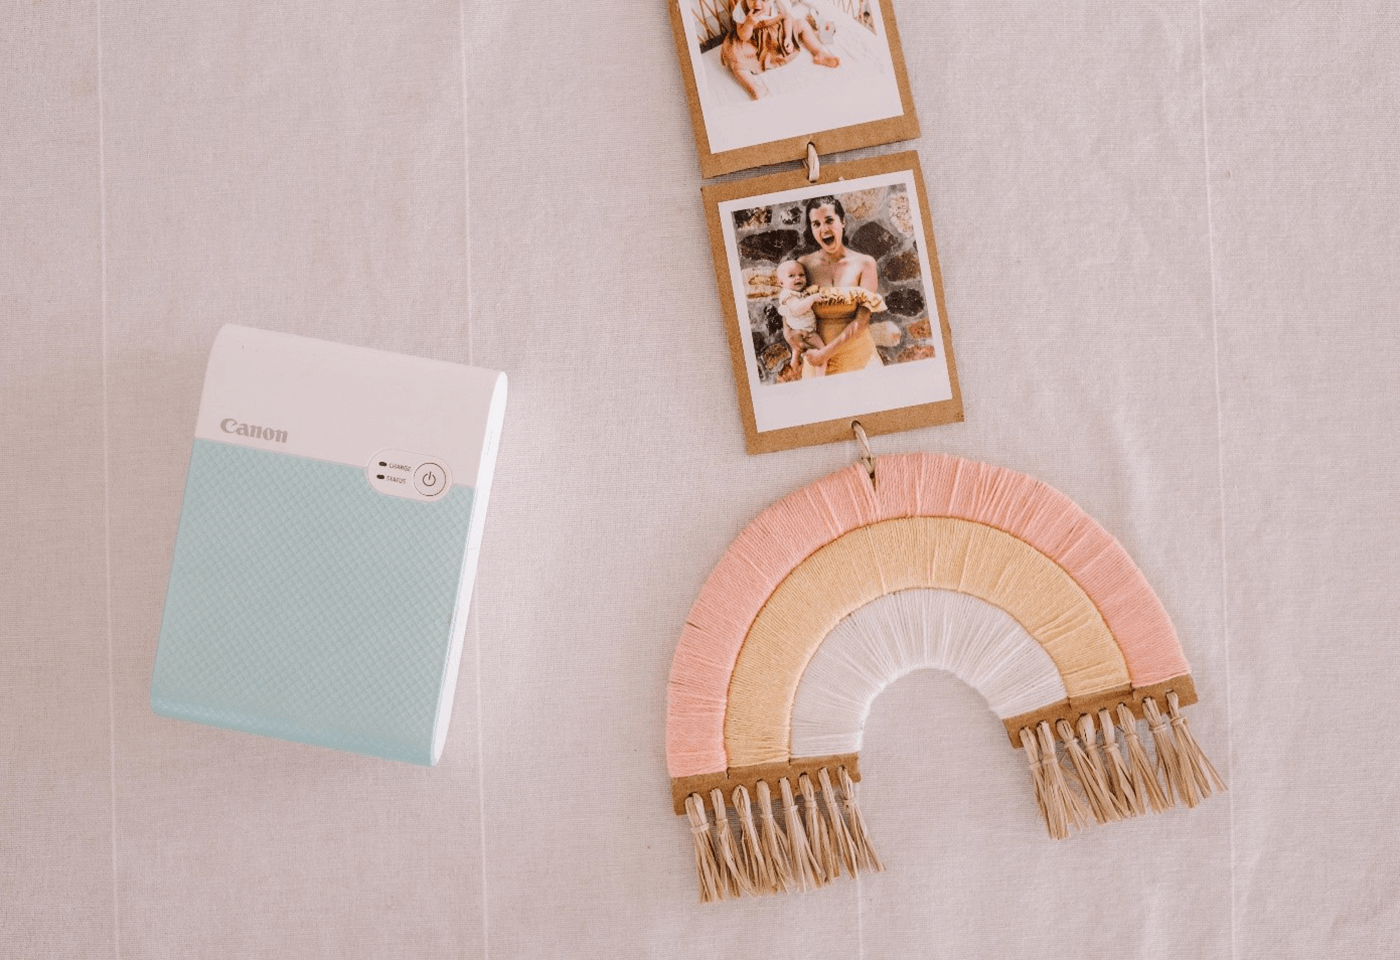 Make Your Own Photo Frame Wall Hanging with the Canon Selphy Printer